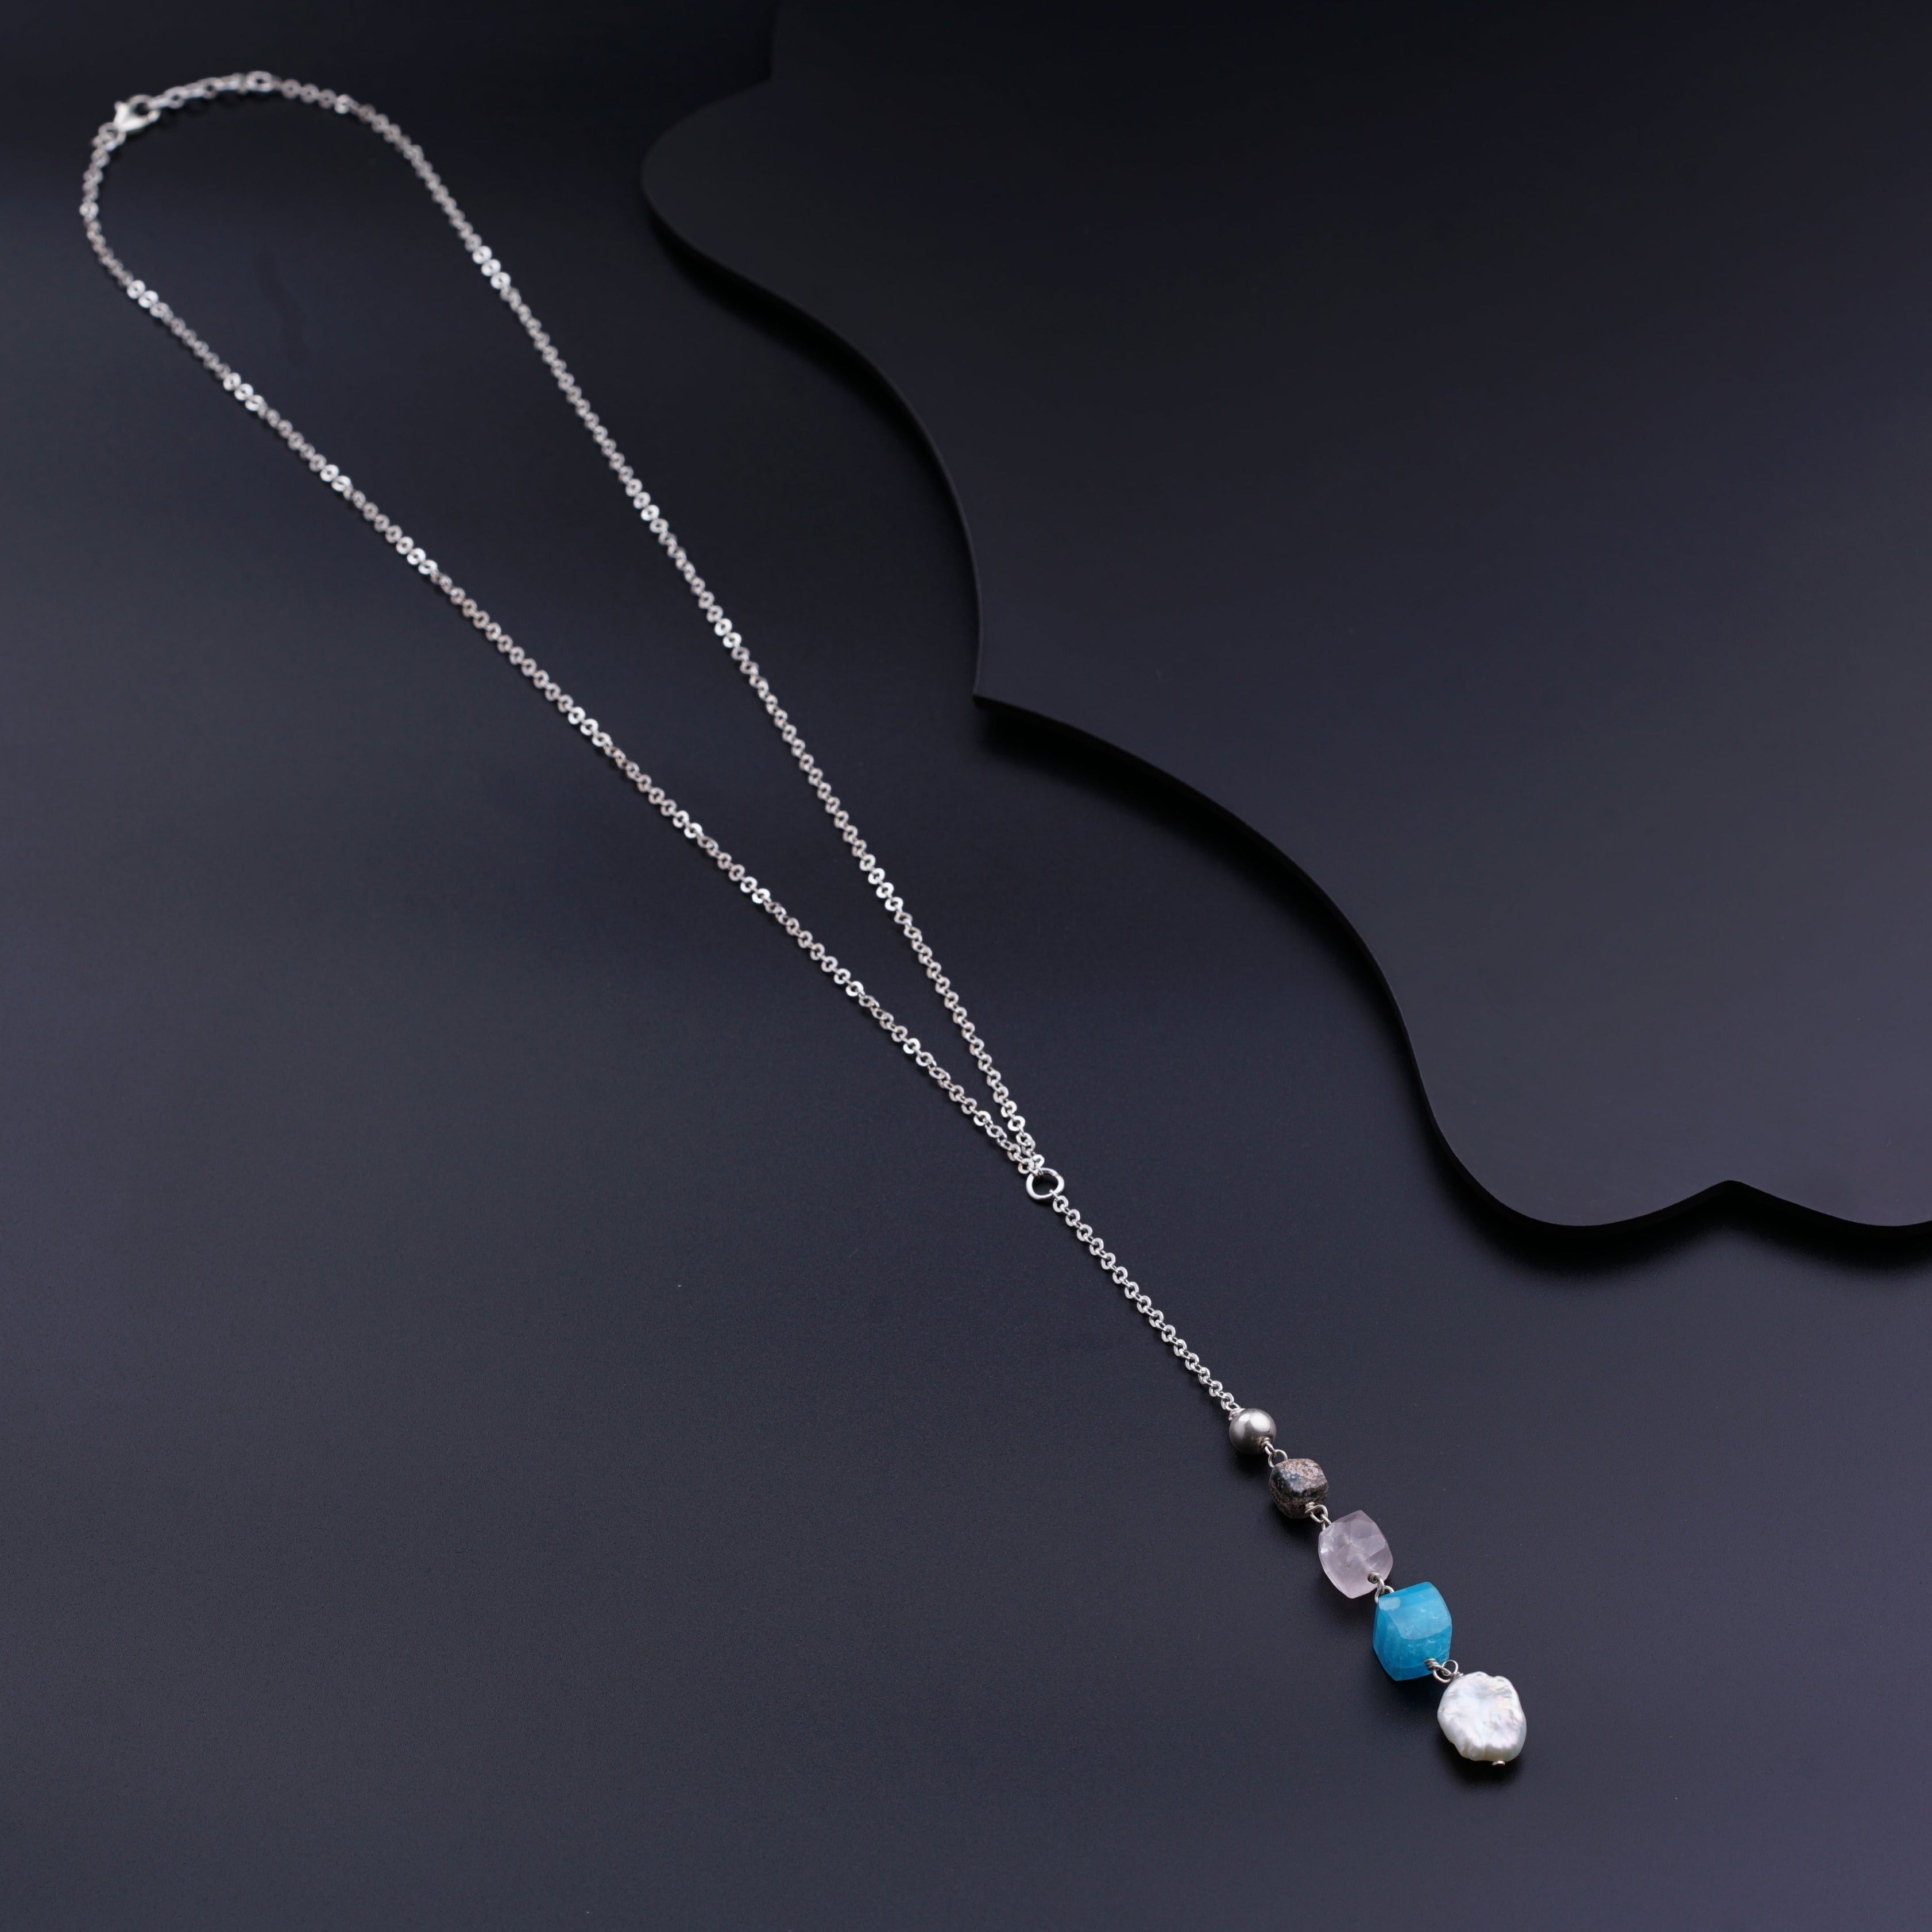 a silver chain with a blue and white bead hanging from it